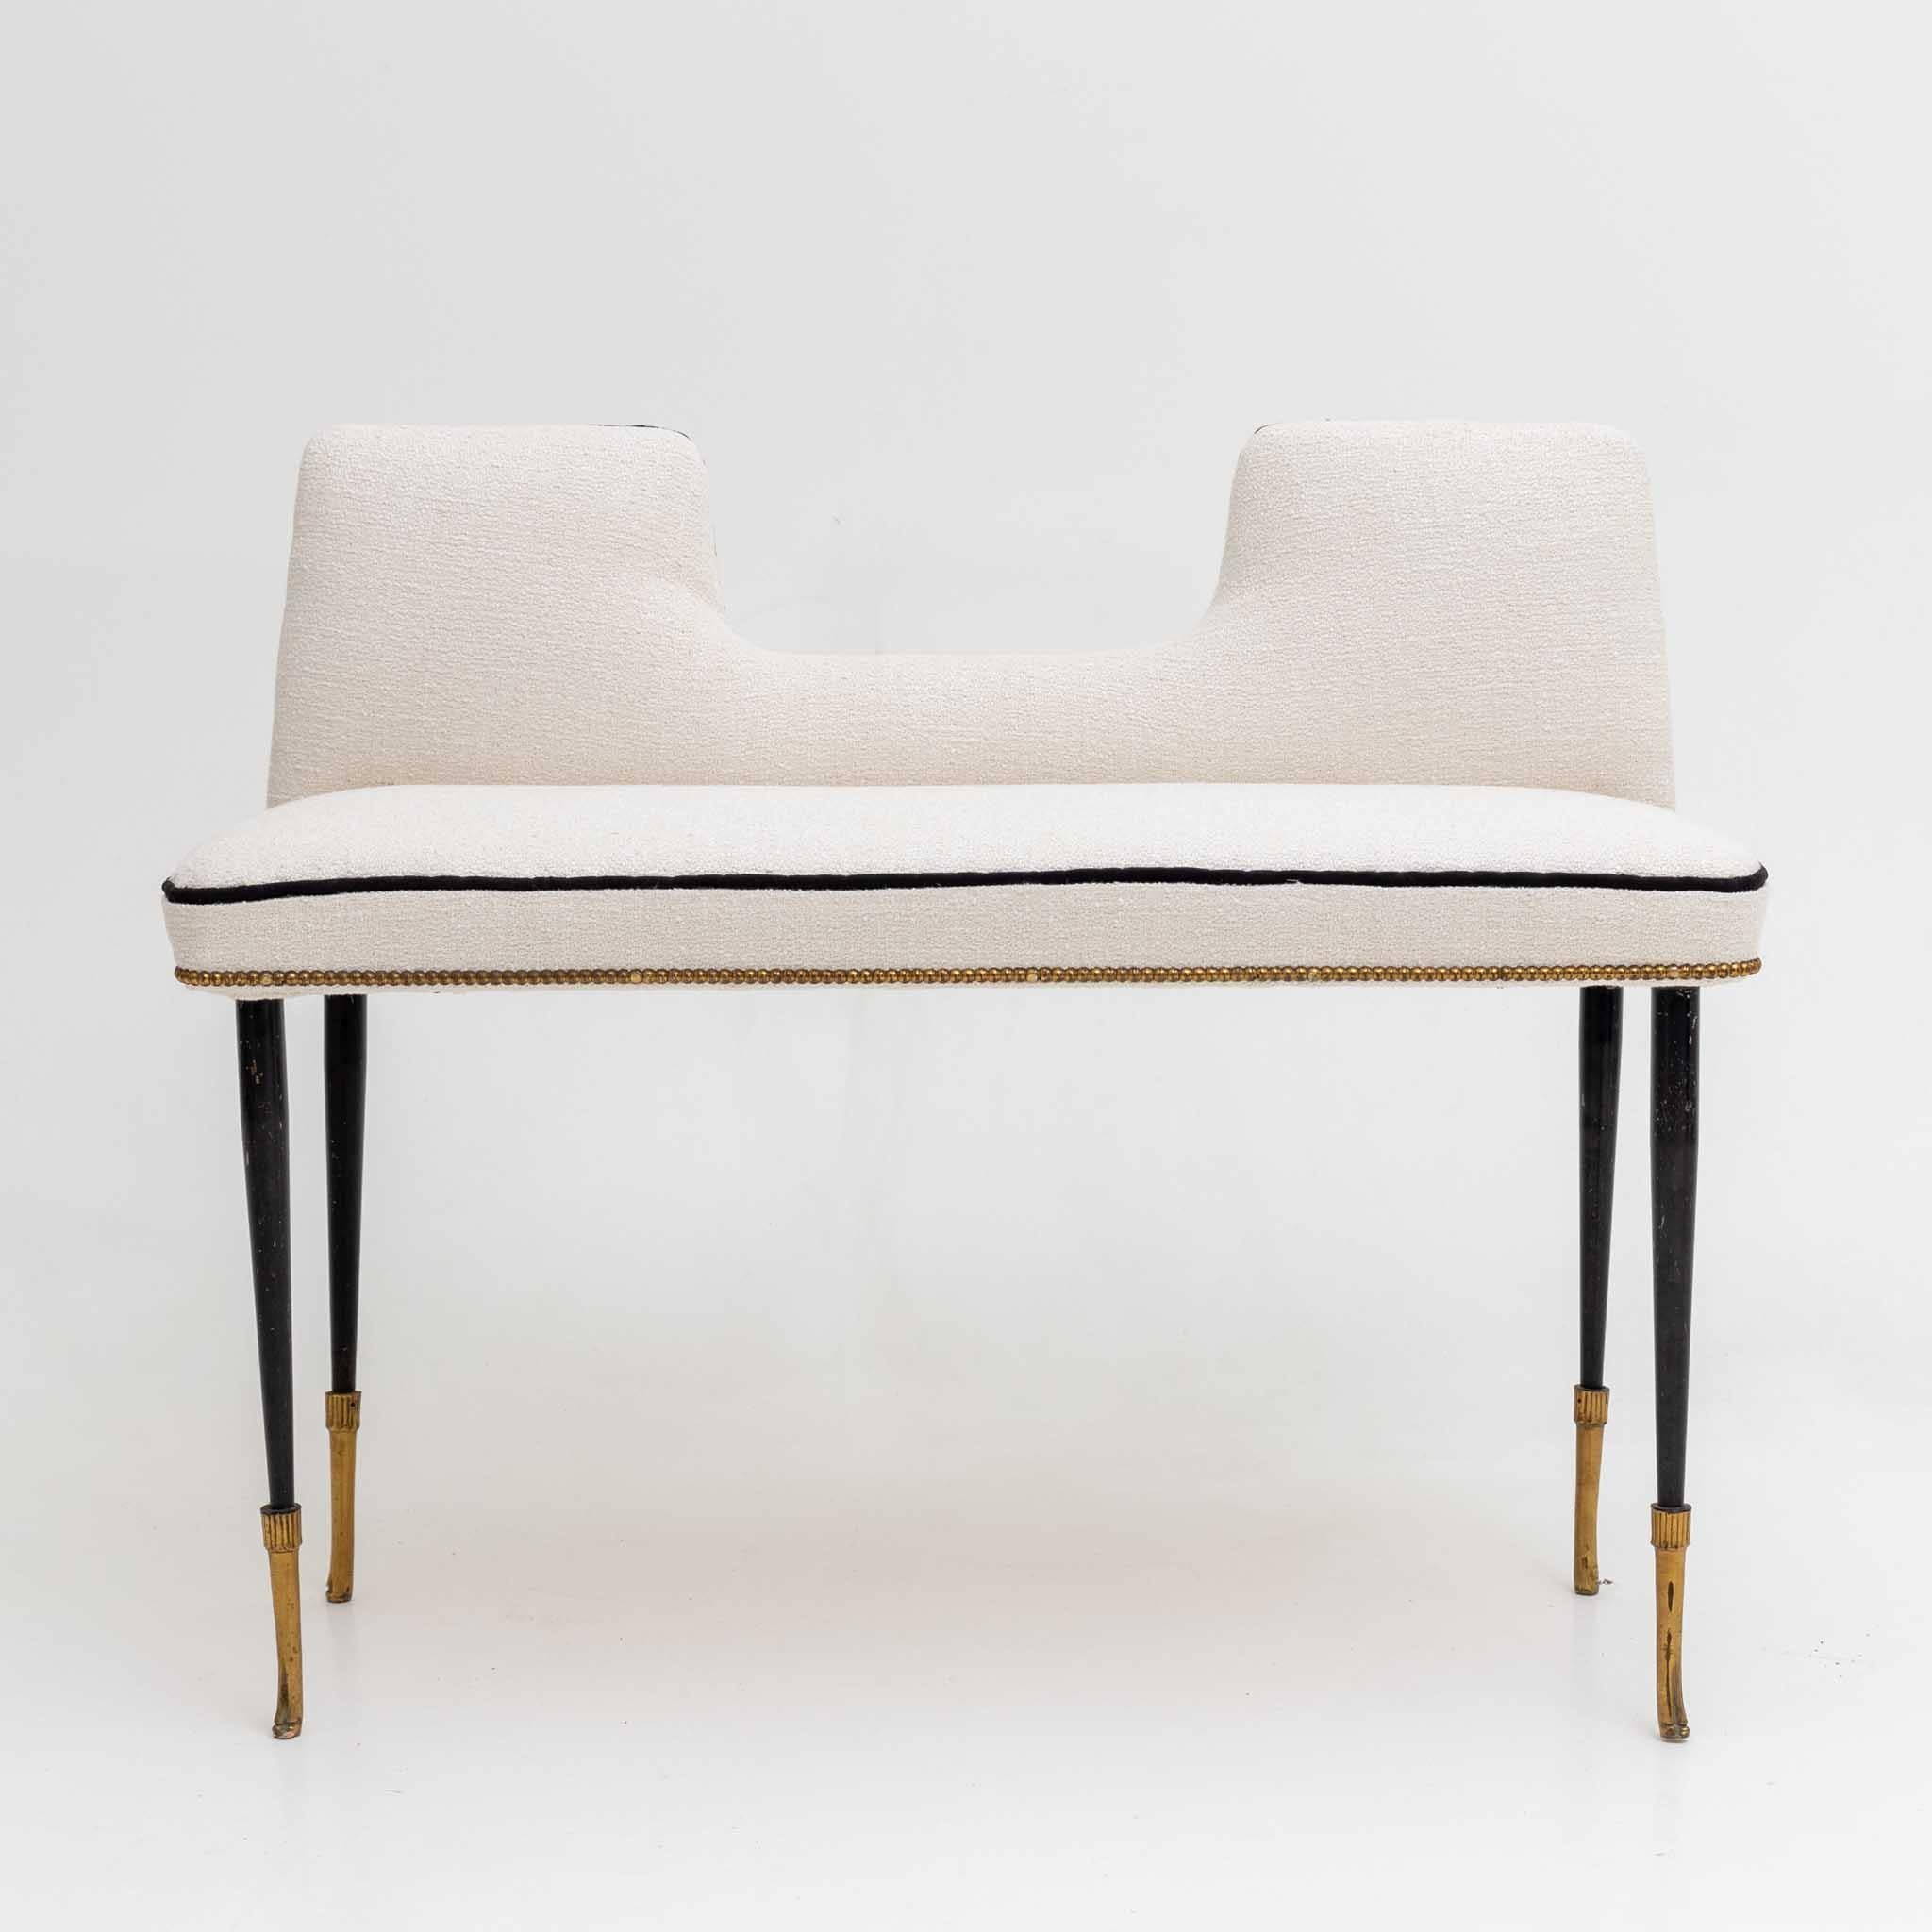 Small bench on conical black metal legs with brass sabots and seat with small backrest. The bench has been reupholstered in a white bouclé fabric with black piping and rivet decoration.